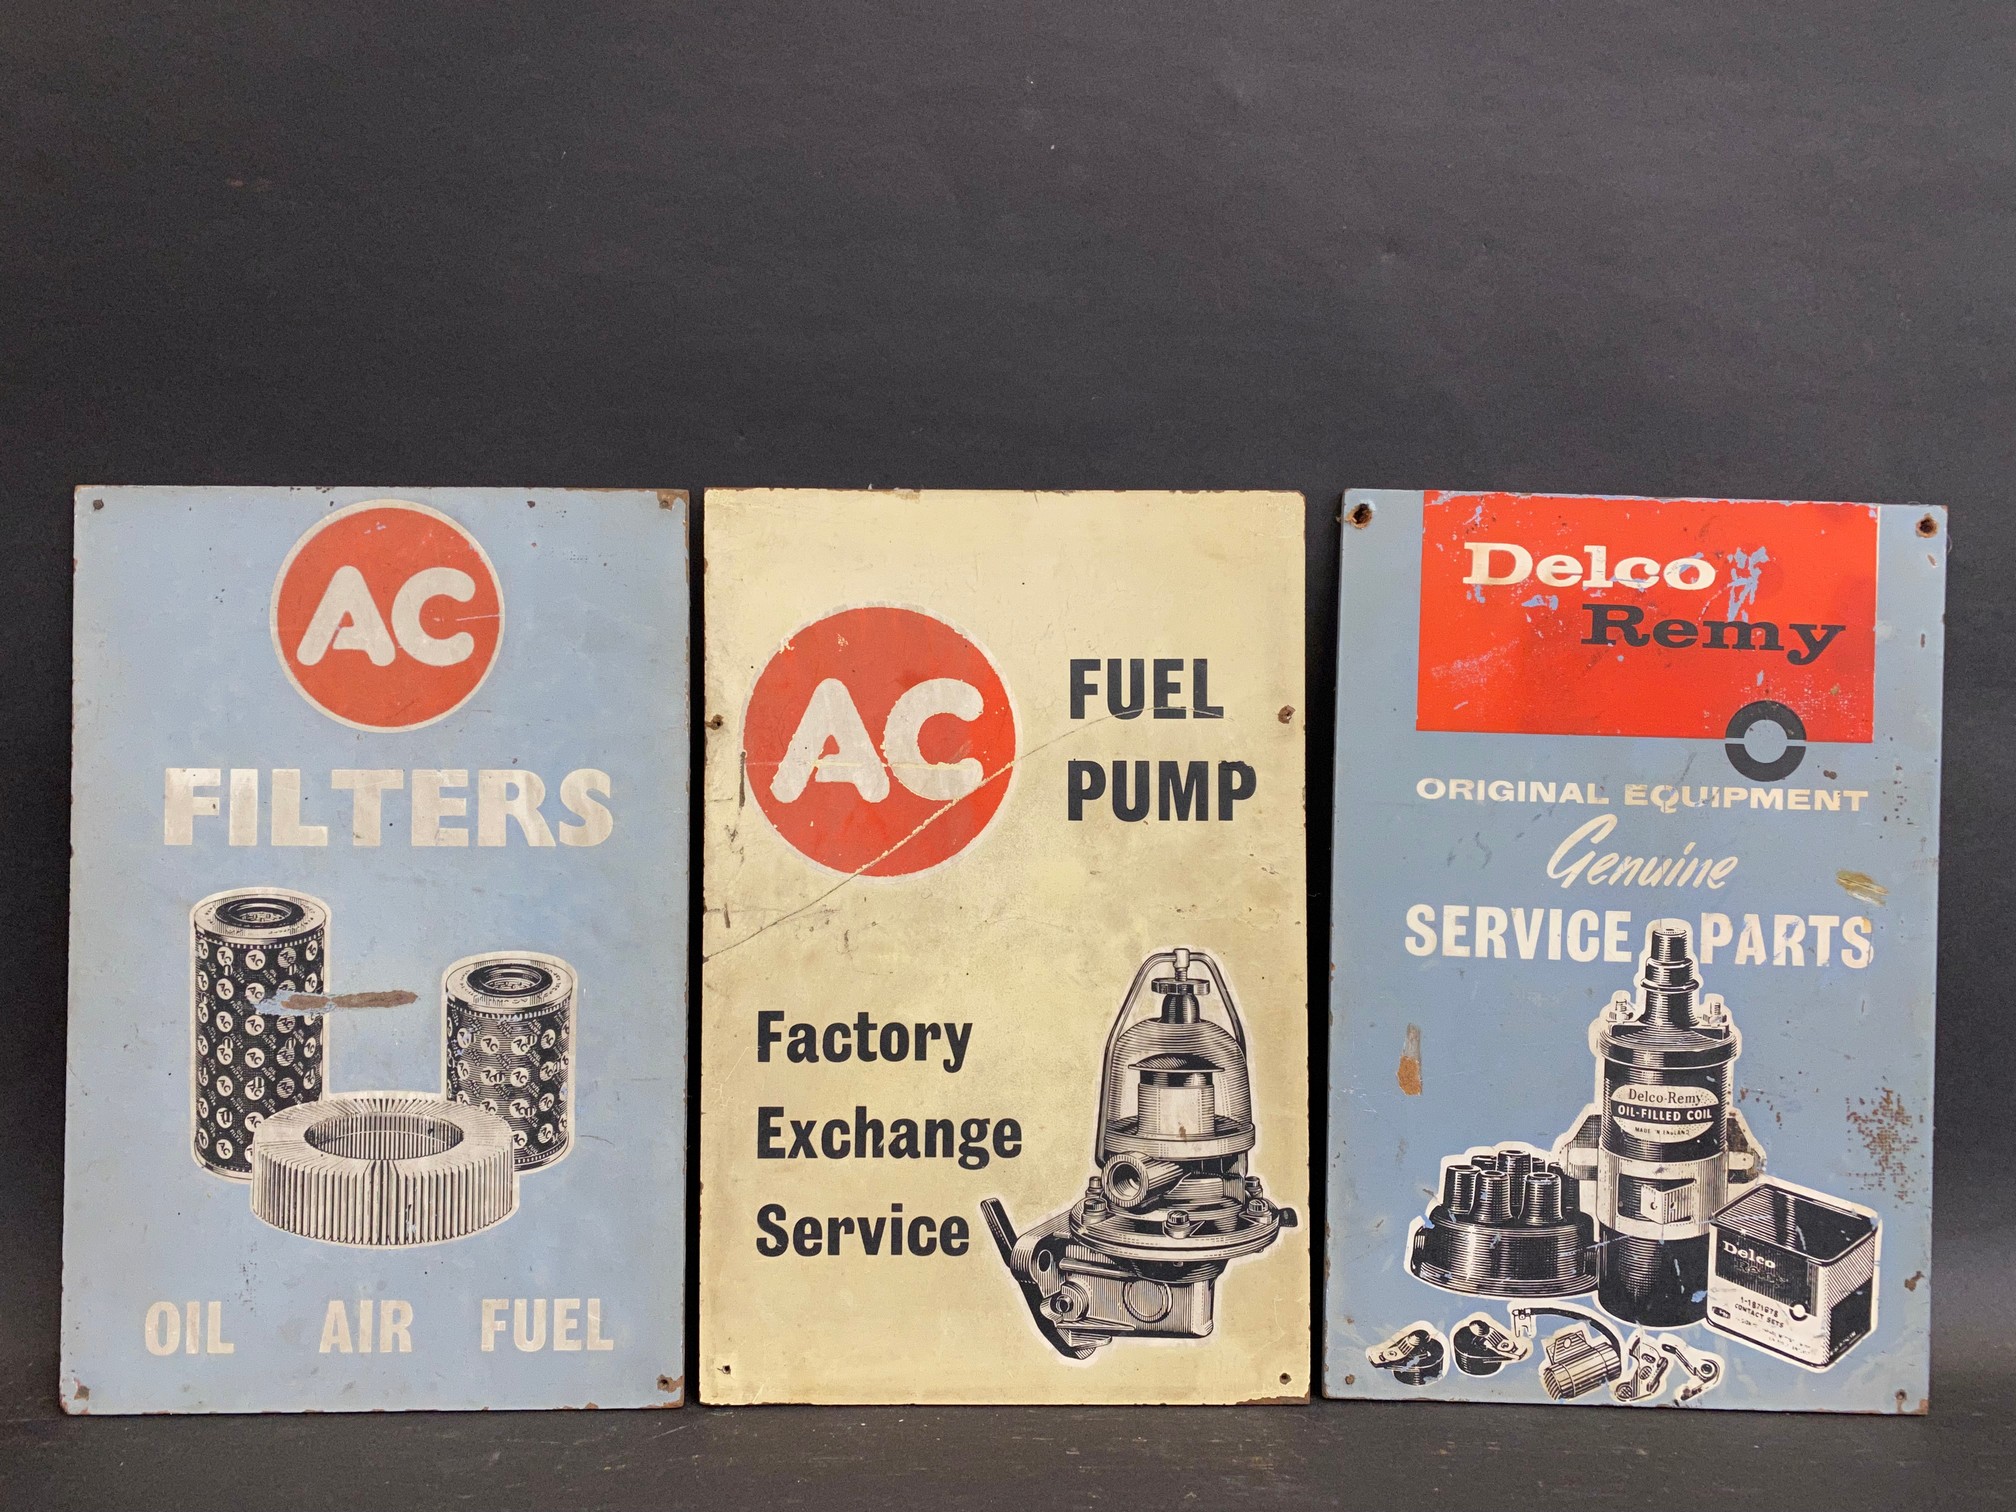 Three hardboard advertising sign, two for AC (filters and fuel pumps) and one for Delco Remy, all